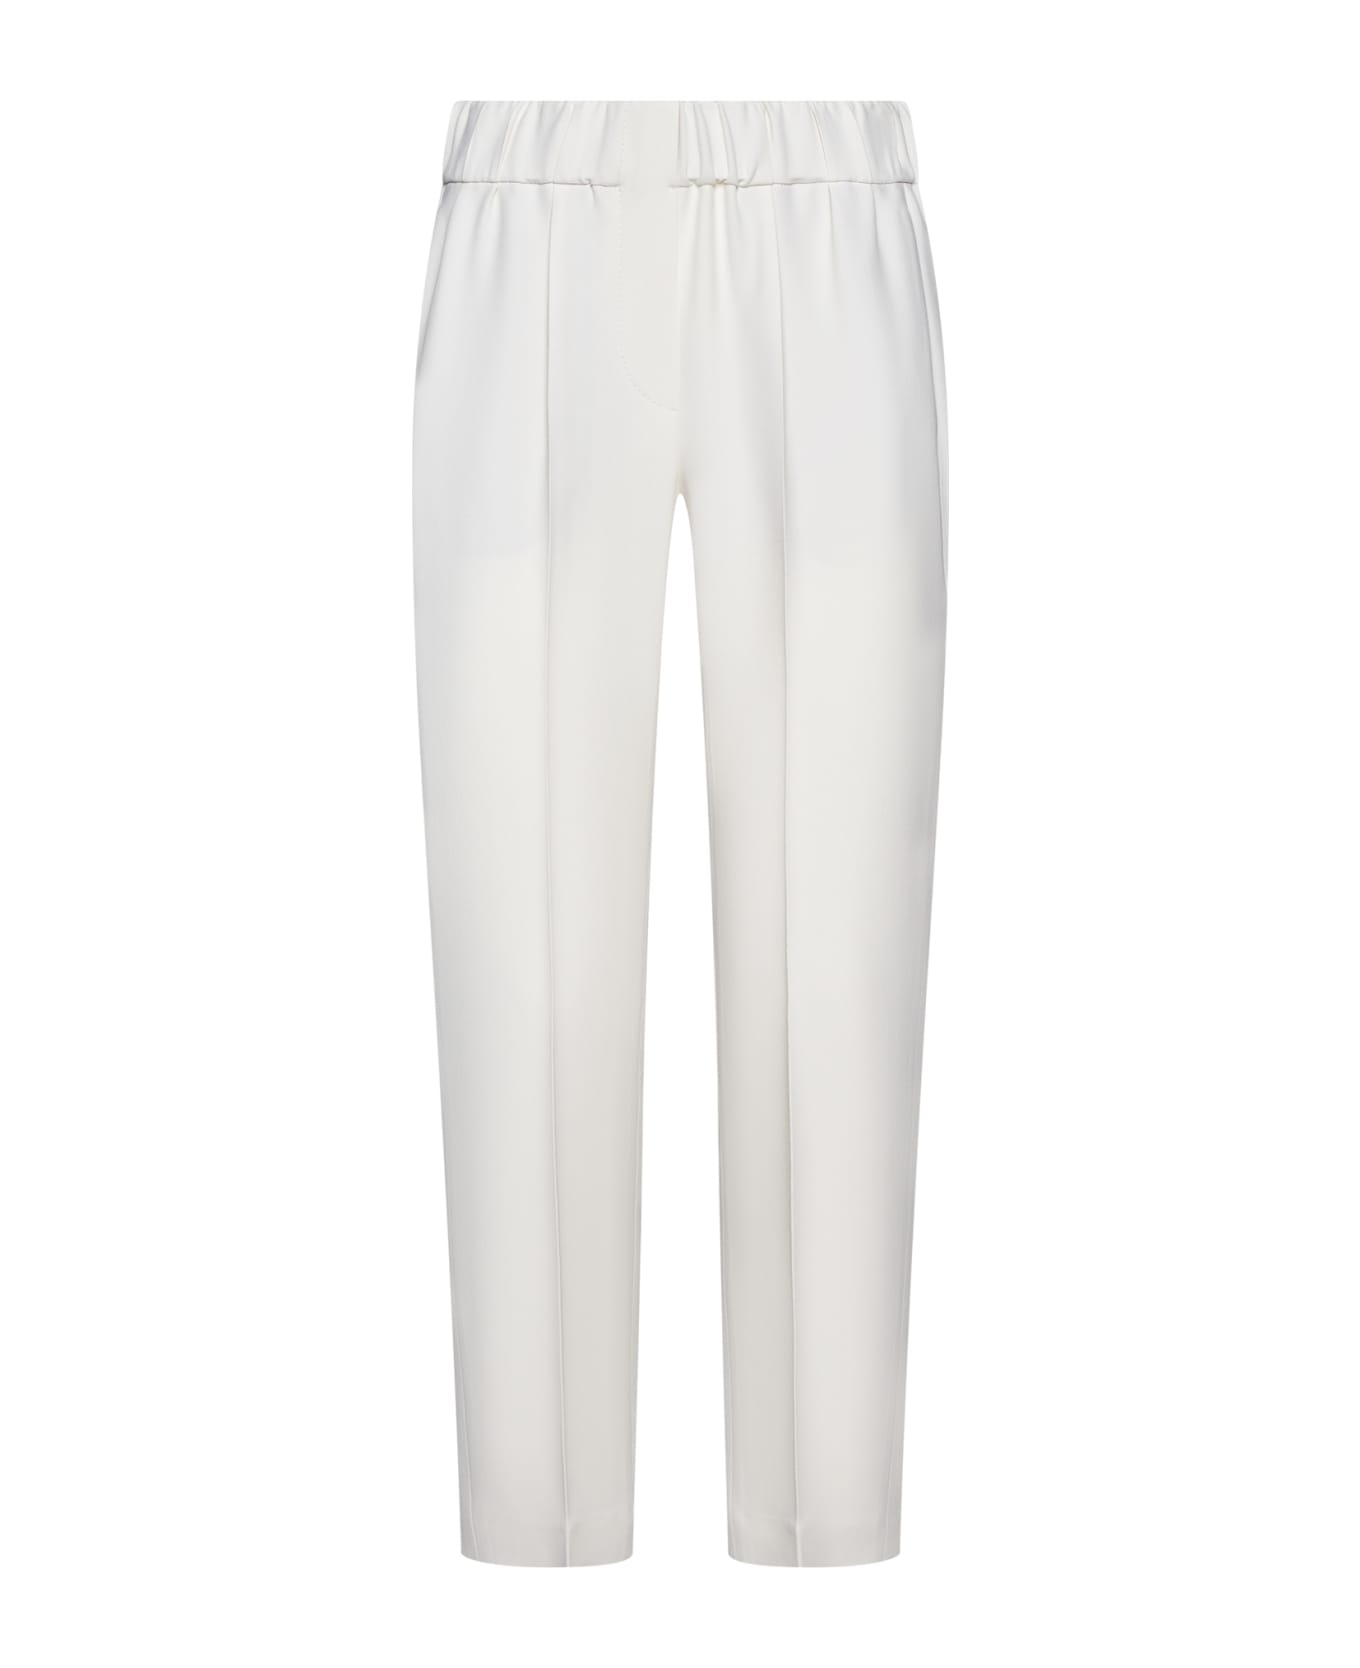 Brunello Cucinelli Elastic Waist Cropped Trousers - Pure white ボトムス